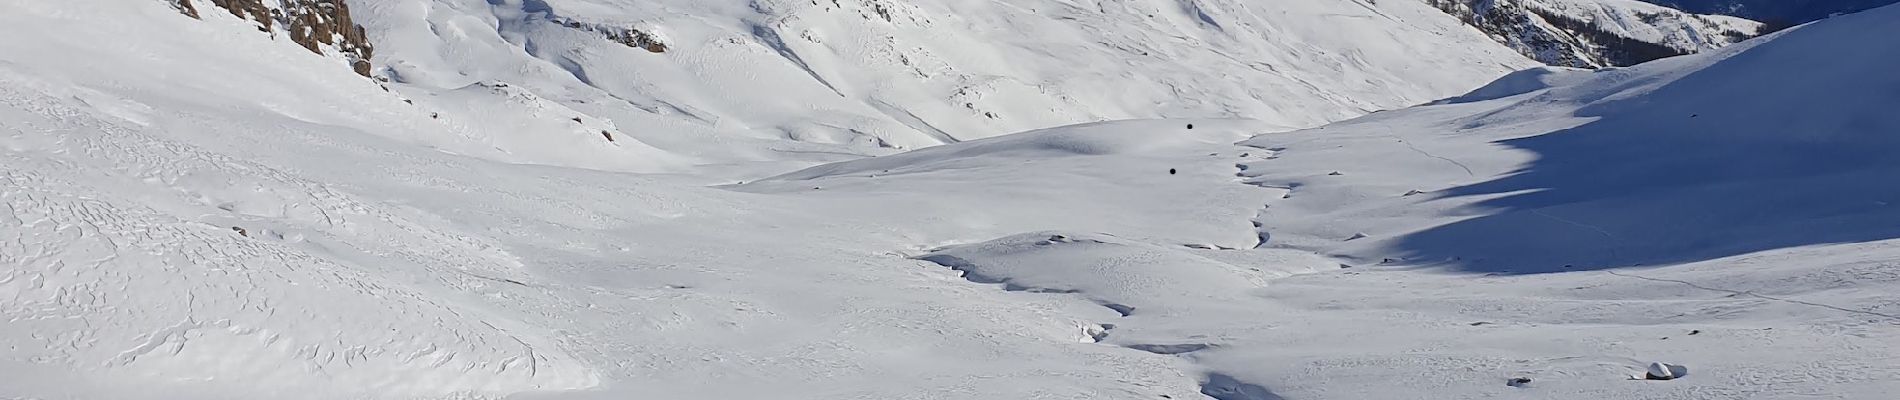 Trail Touring skiing Puy-Saint-André - rocher blanc - Photo